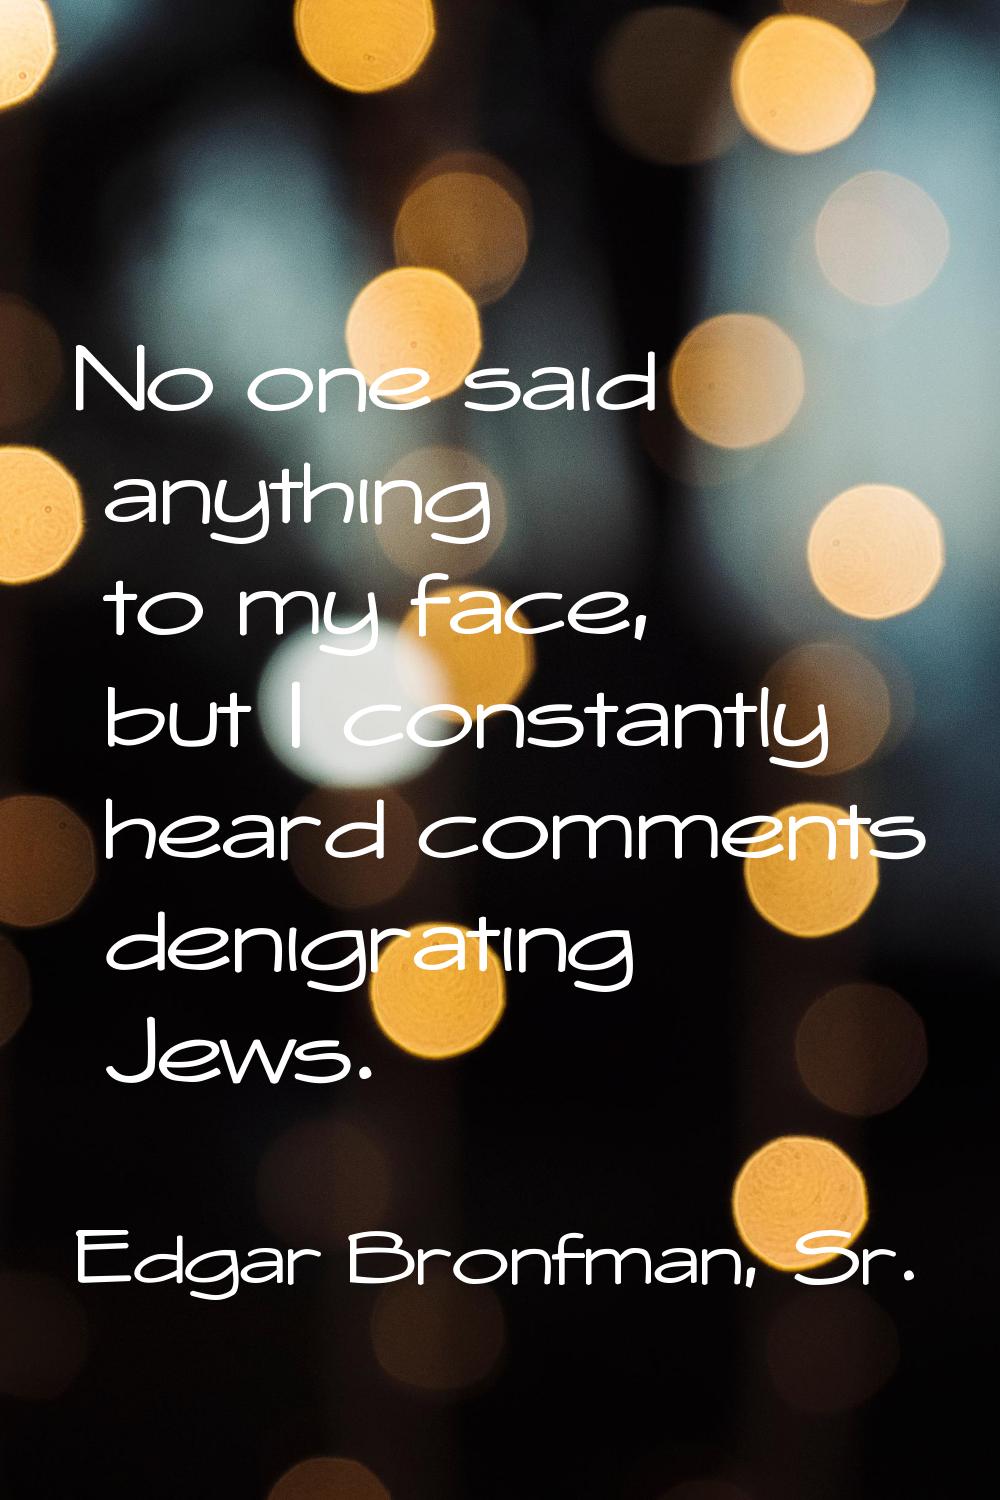 No one said anything to my face, but I constantly heard comments denigrating Jews.